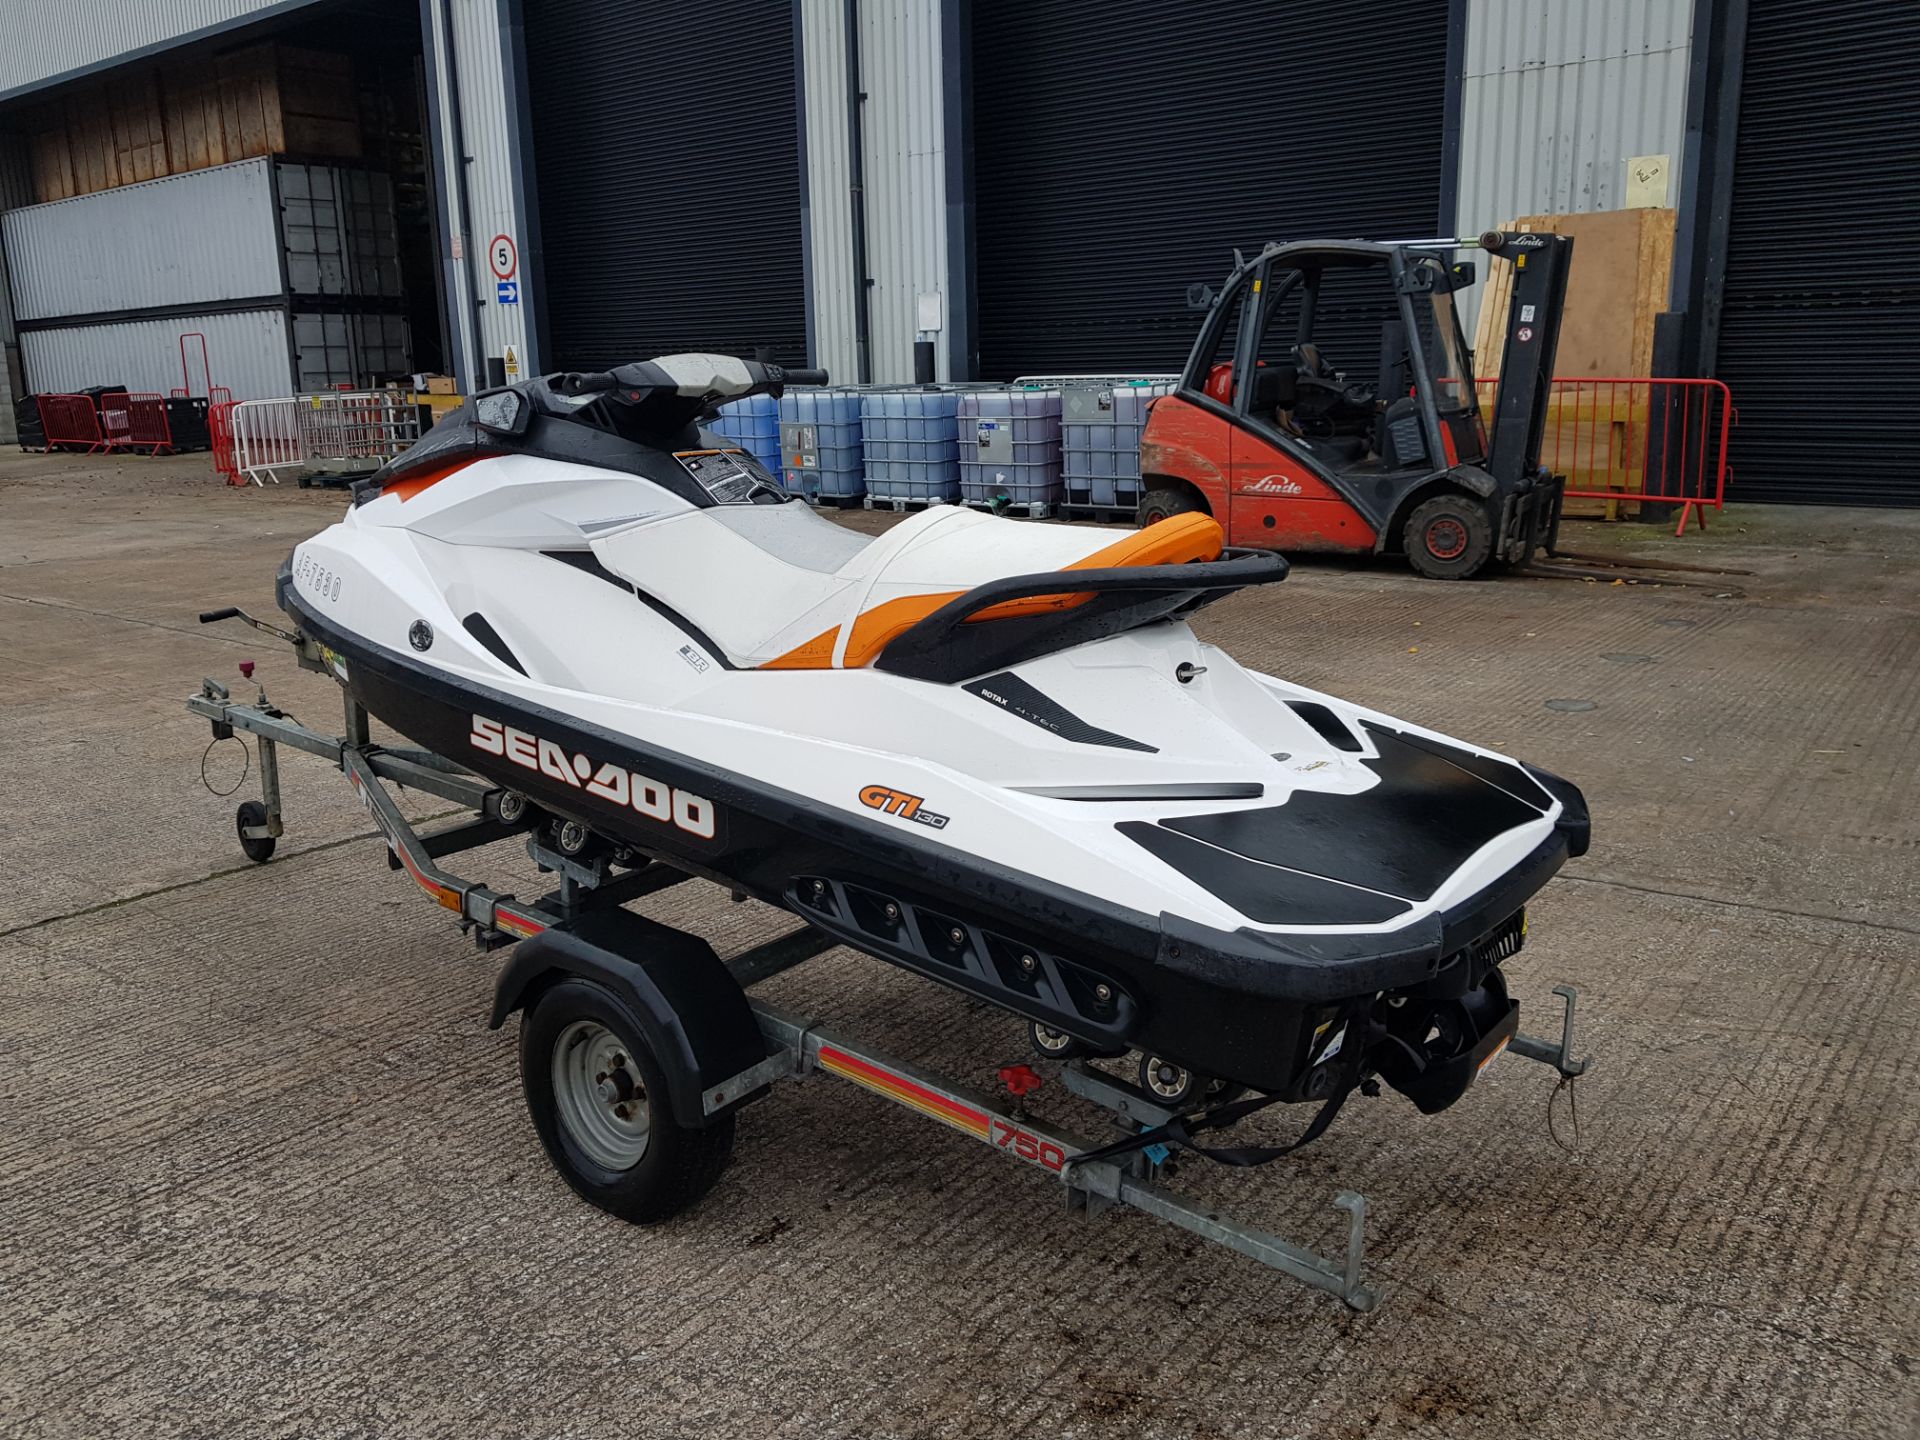 SEA DOO GTI-130 IBR - INTELLIGENT BRAKE & REVERSE ROTAX 4-TEC 2 PERSONS JET SKI WITH AN SBS TOWING - Image 2 of 6